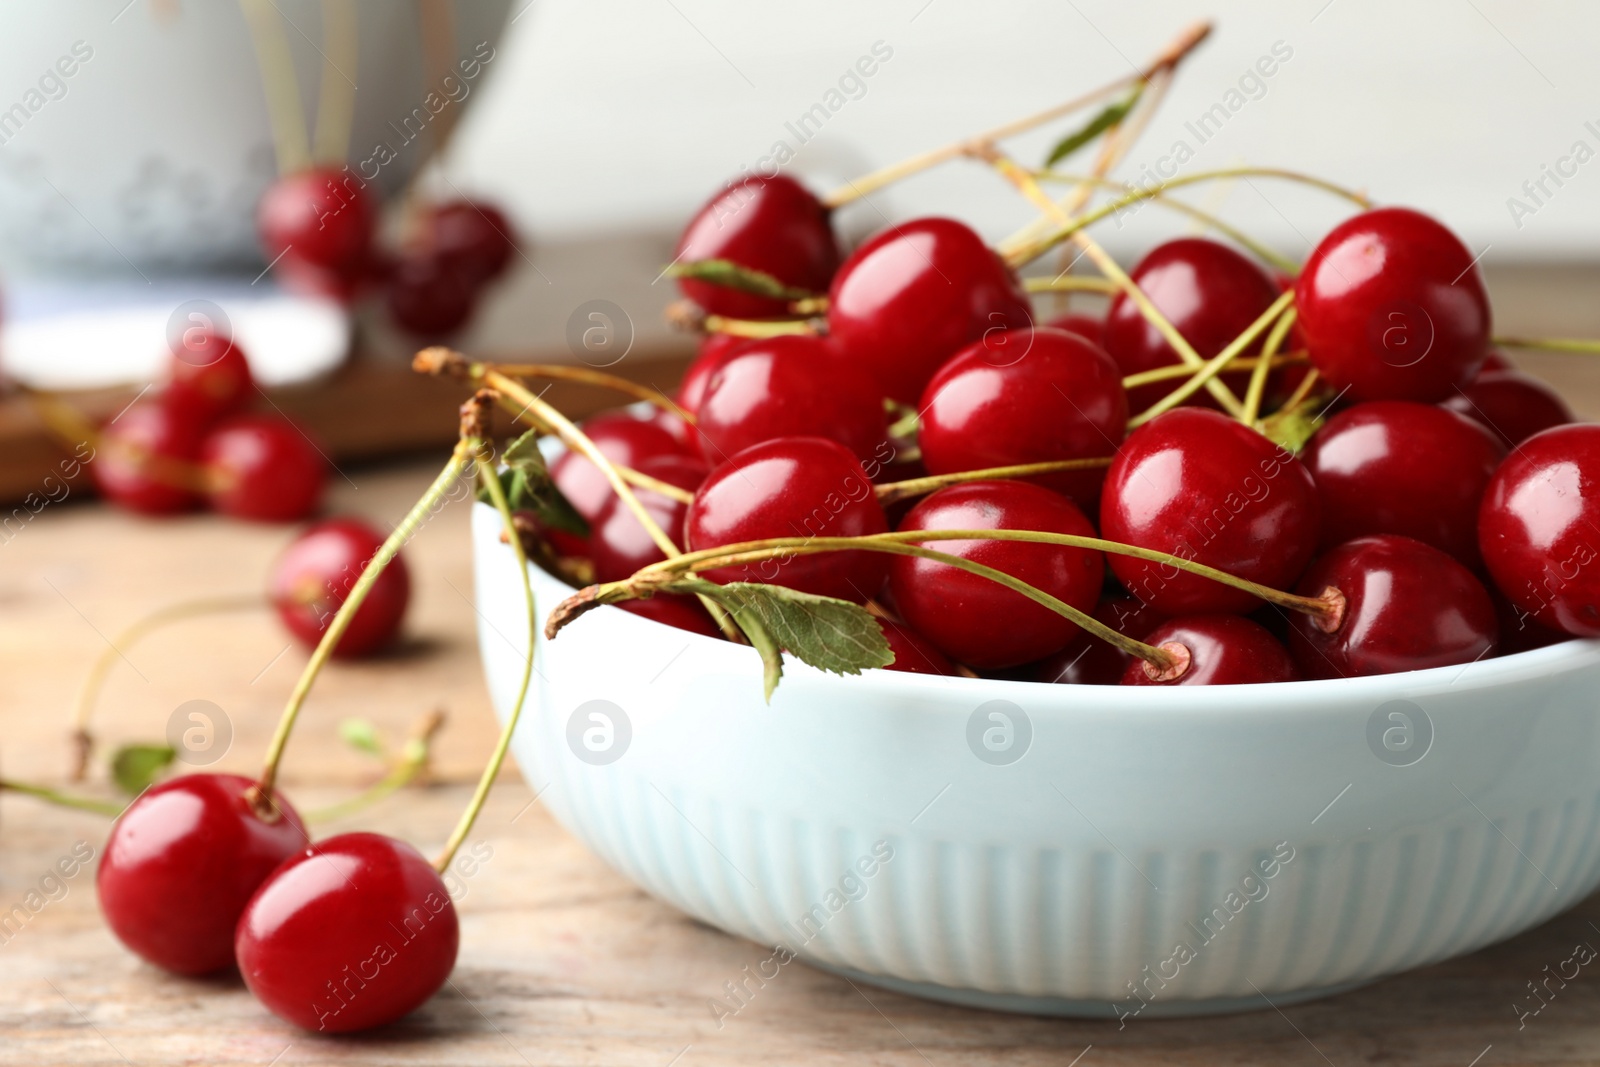 Photo of Bowl of delicious cherries on wooden table, closeup view. Space for text